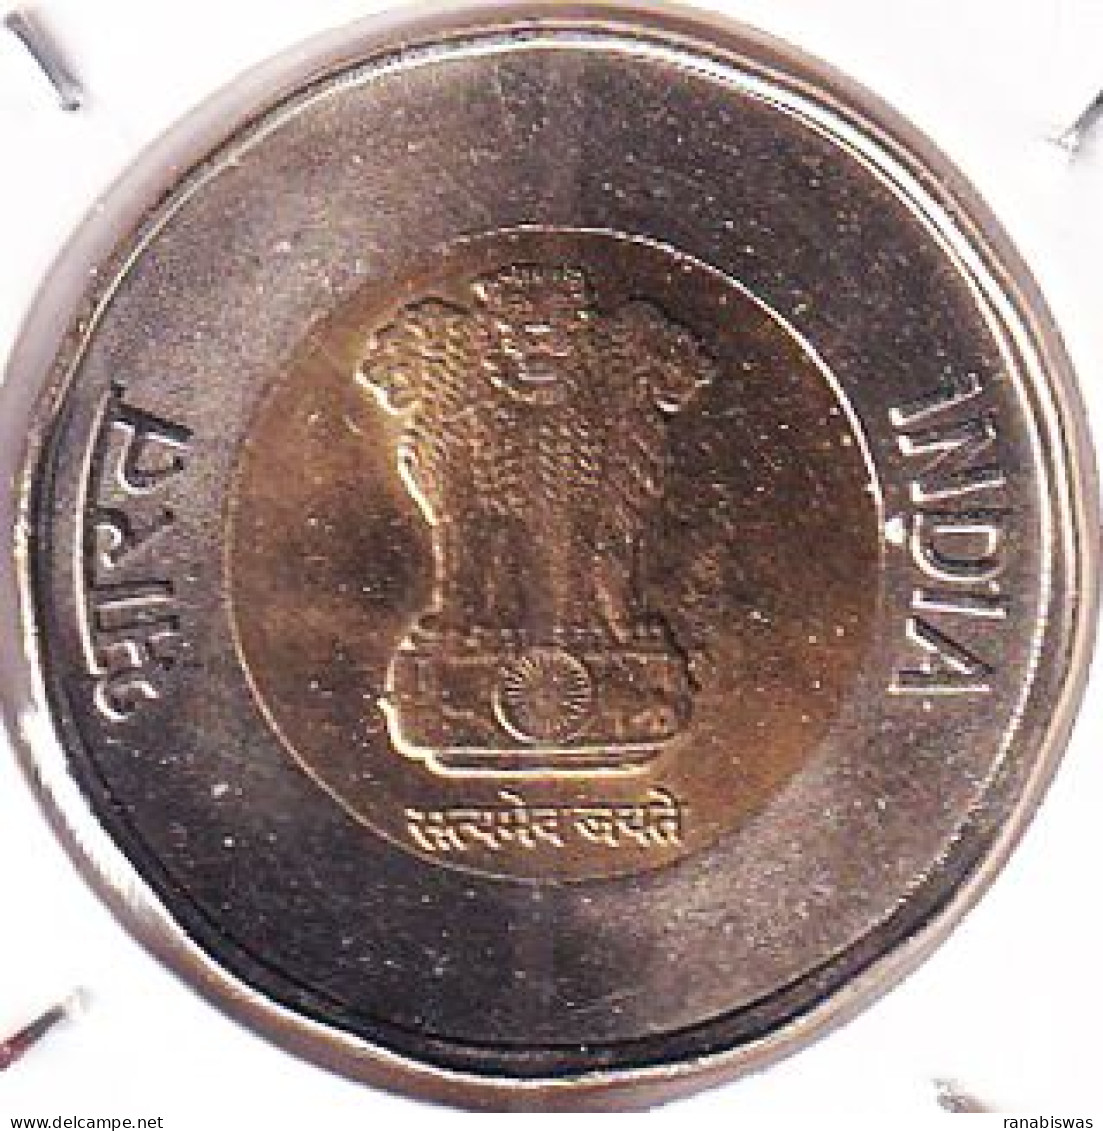 INDIA COIN LOT 444, 20 RUPEES 2022, AKAM, HYDERABAD MINT, UNC - India